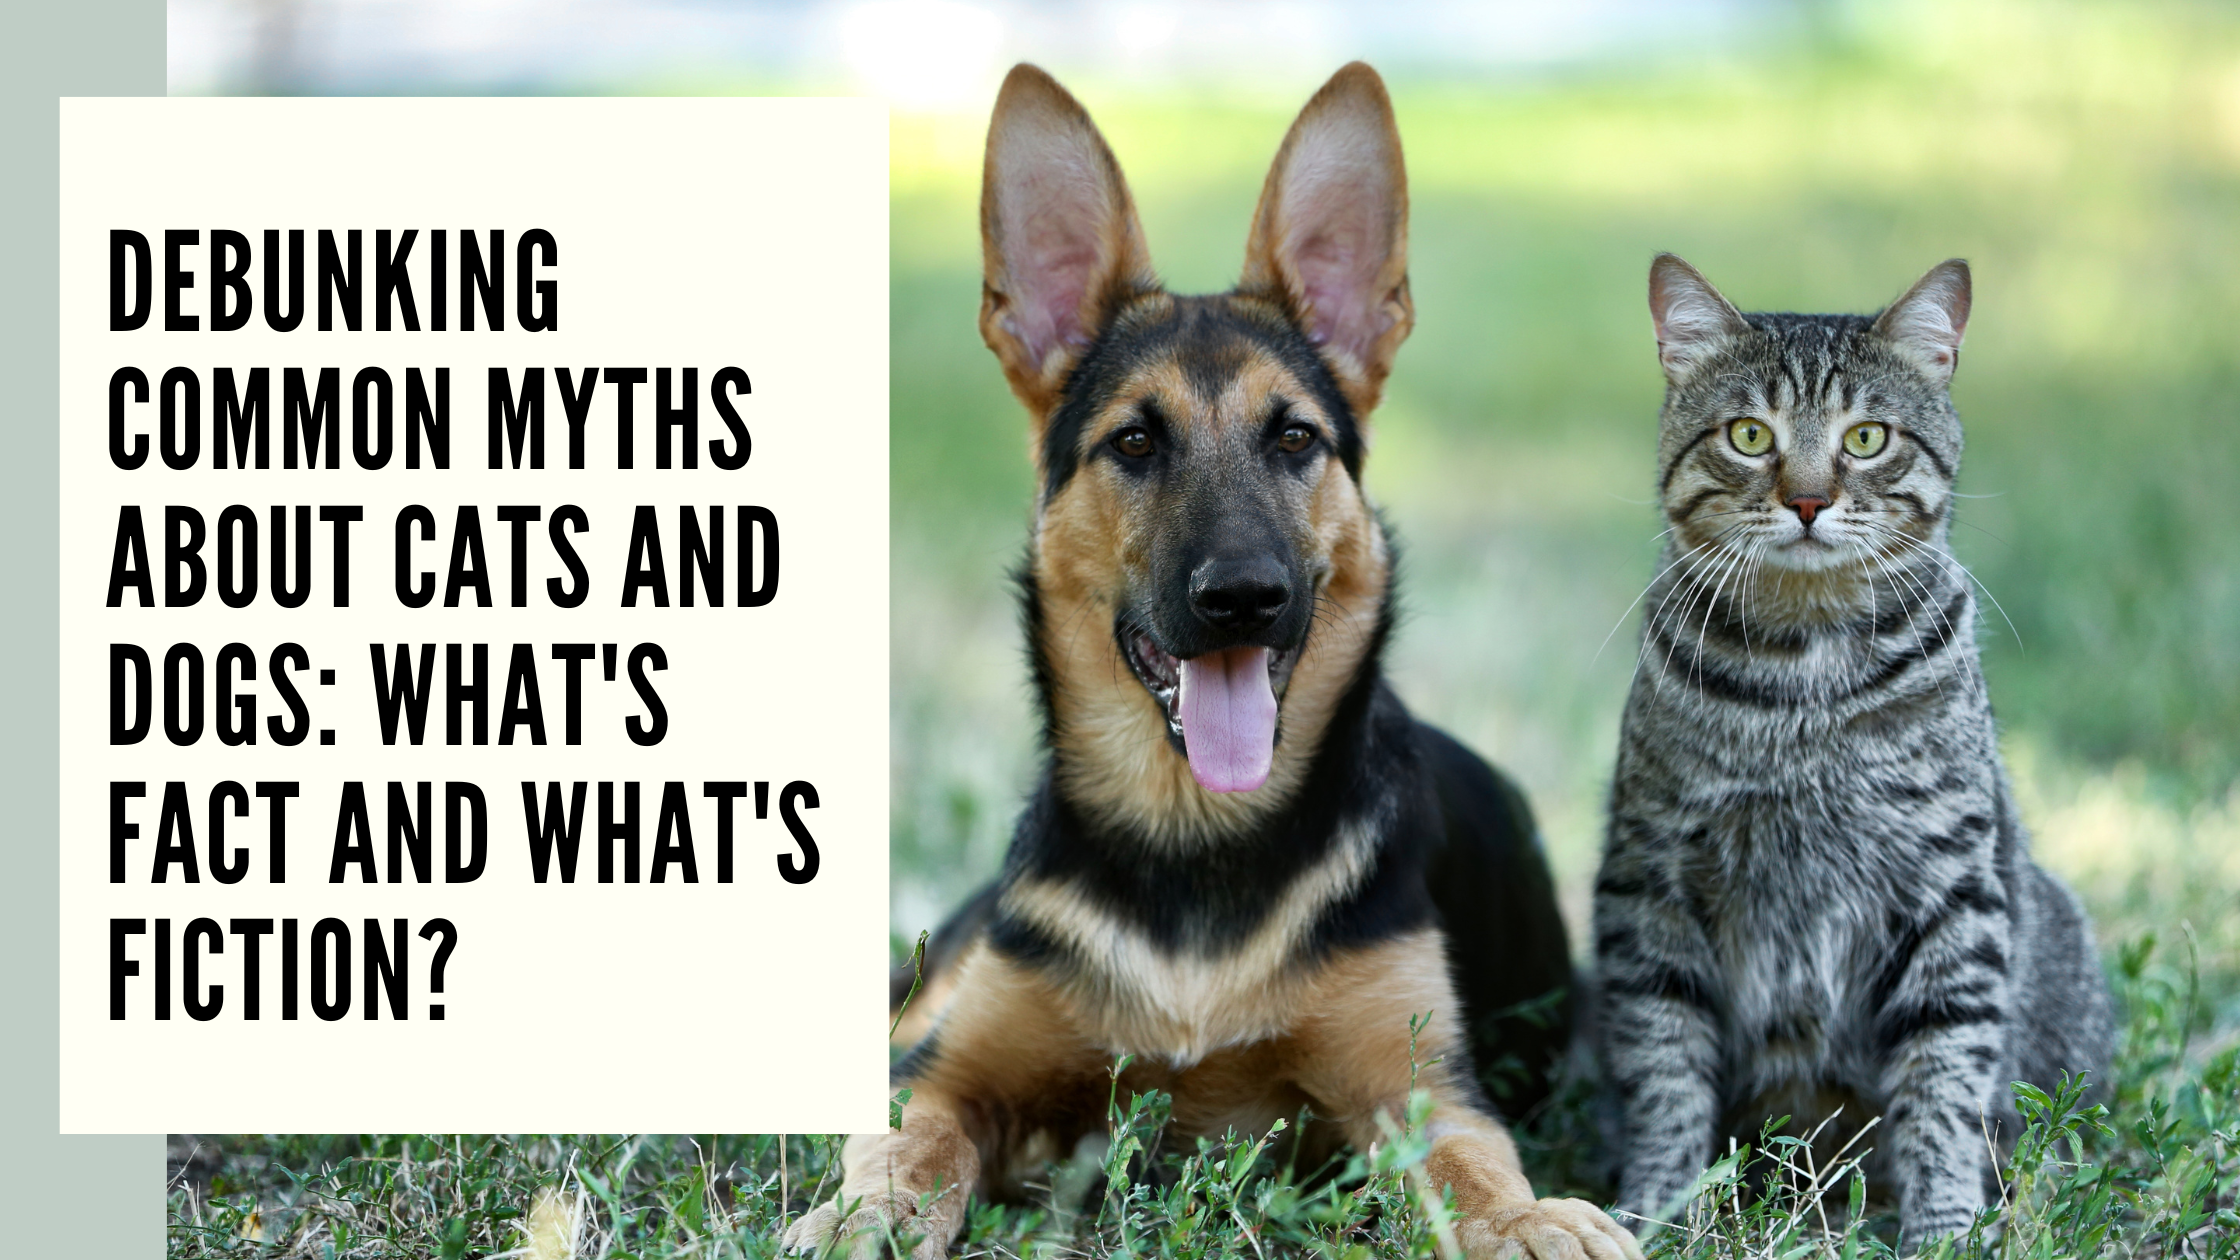 Debunking Common Myths About Cats and Dogs What's Fact and What's Fiction